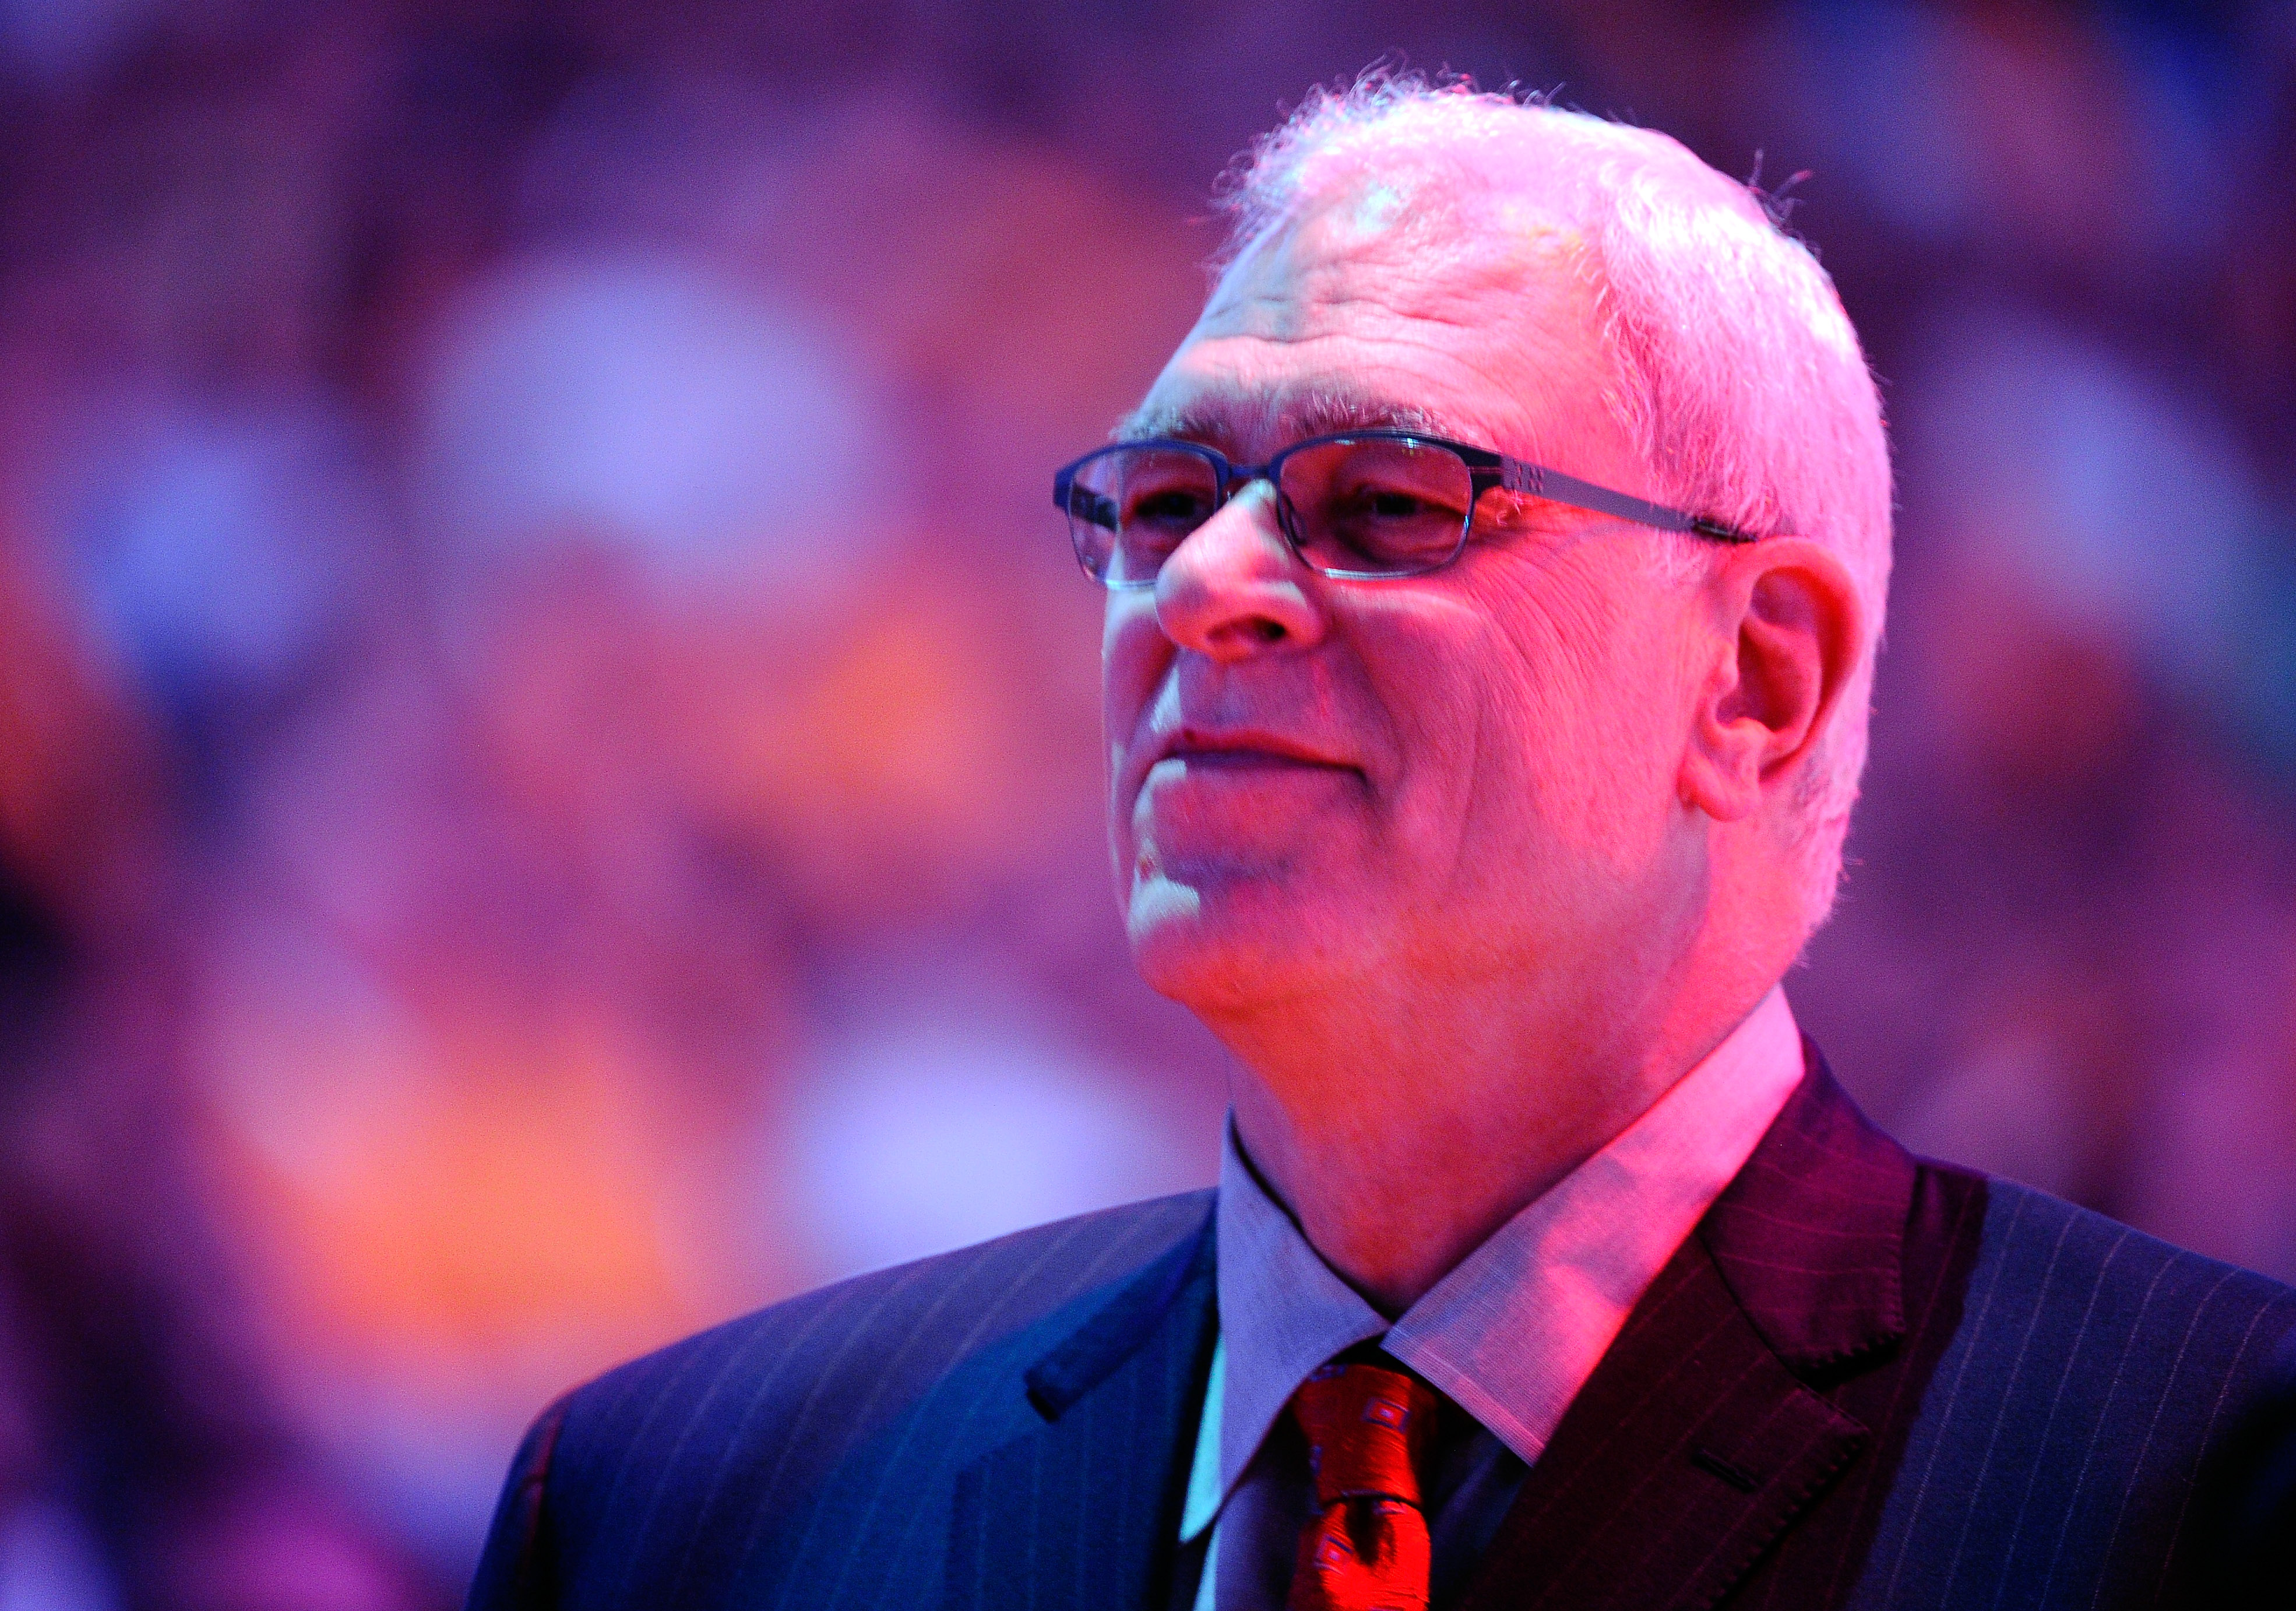 LOS ANGELES, CA - MAY 02:  Head coach Phil Jackson of the Los Angeles Lakers looks on during the national anthem before the Lakers take on the Dallas Mavericks in Game One of the Western Conference Semifinals in the 2011 NBA Playoffs at Staples Center on